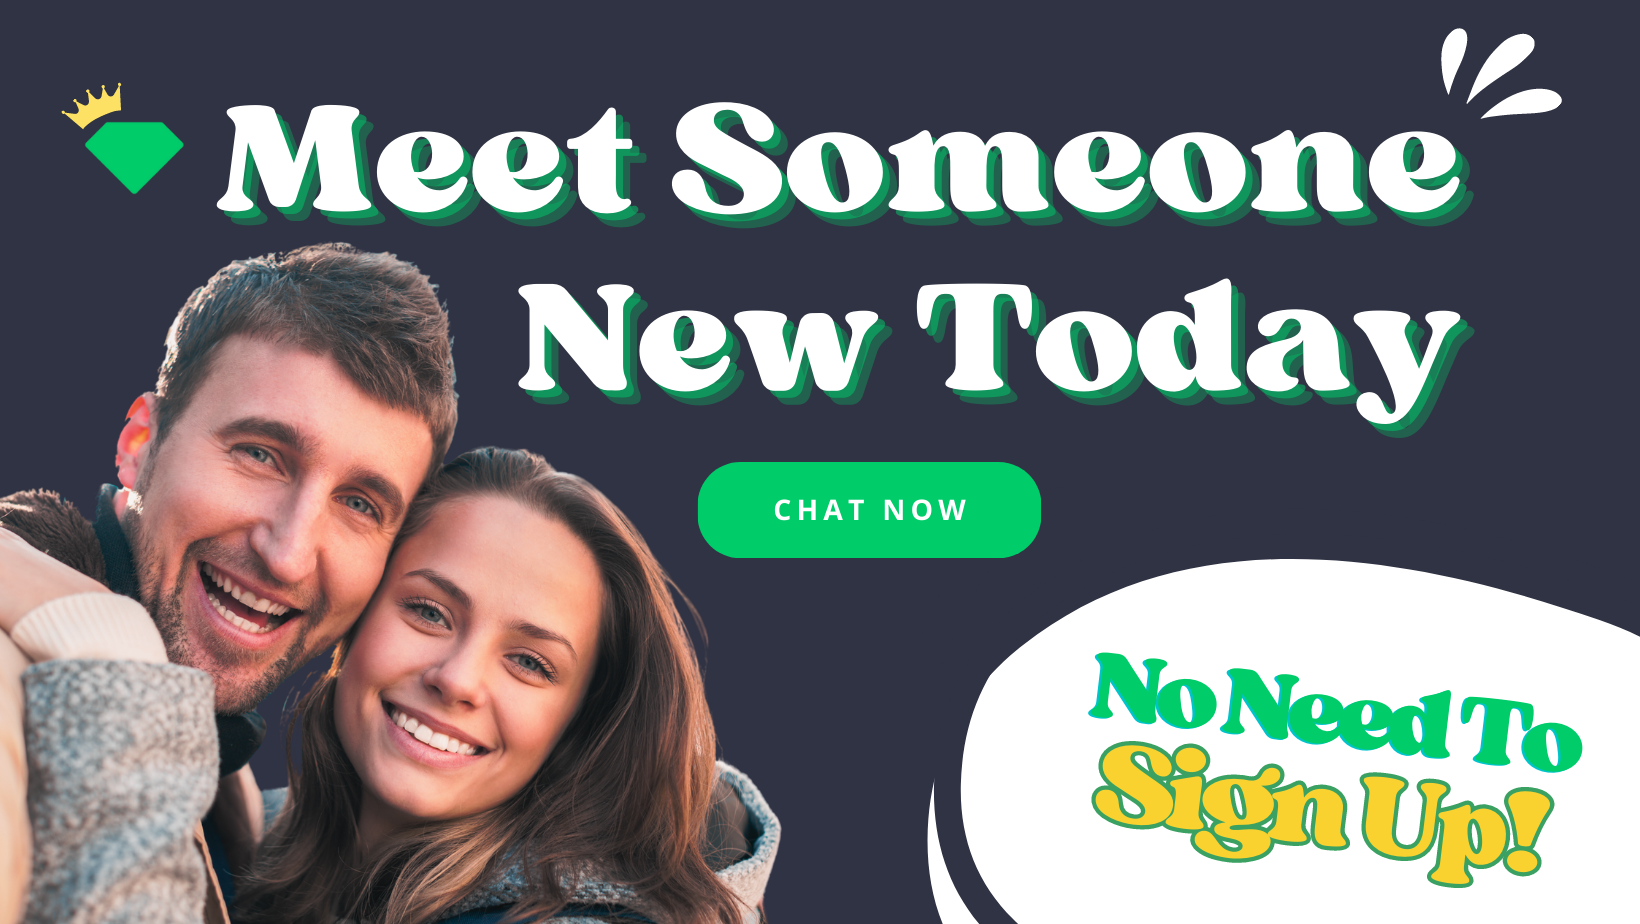 Meet Someone New Today - No Sign Ups